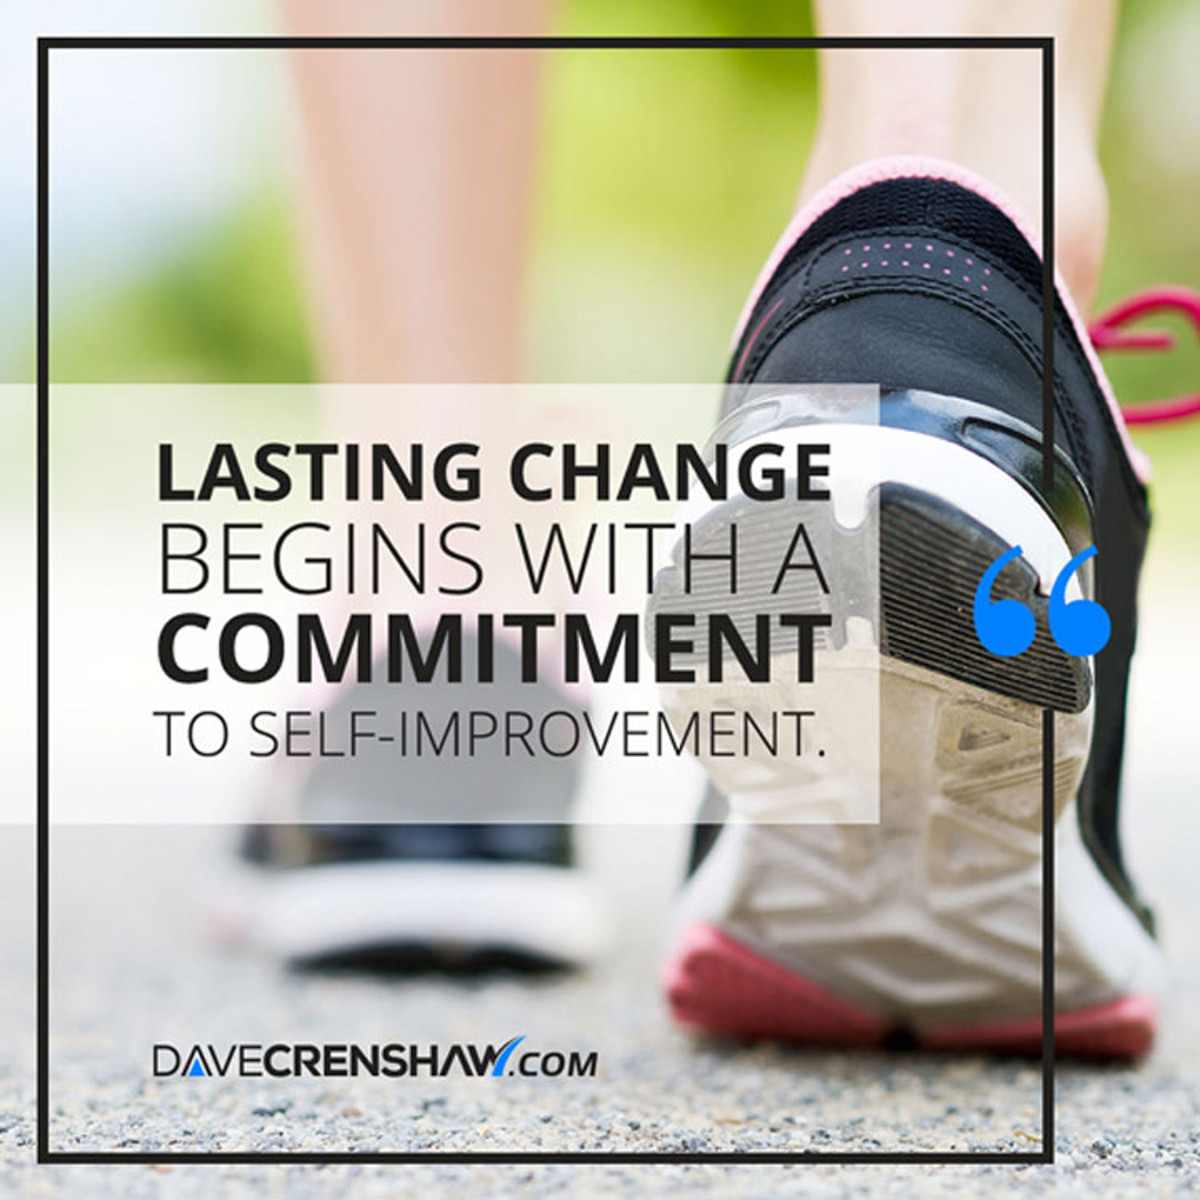 Lasting change begins with a committment to self-improvement